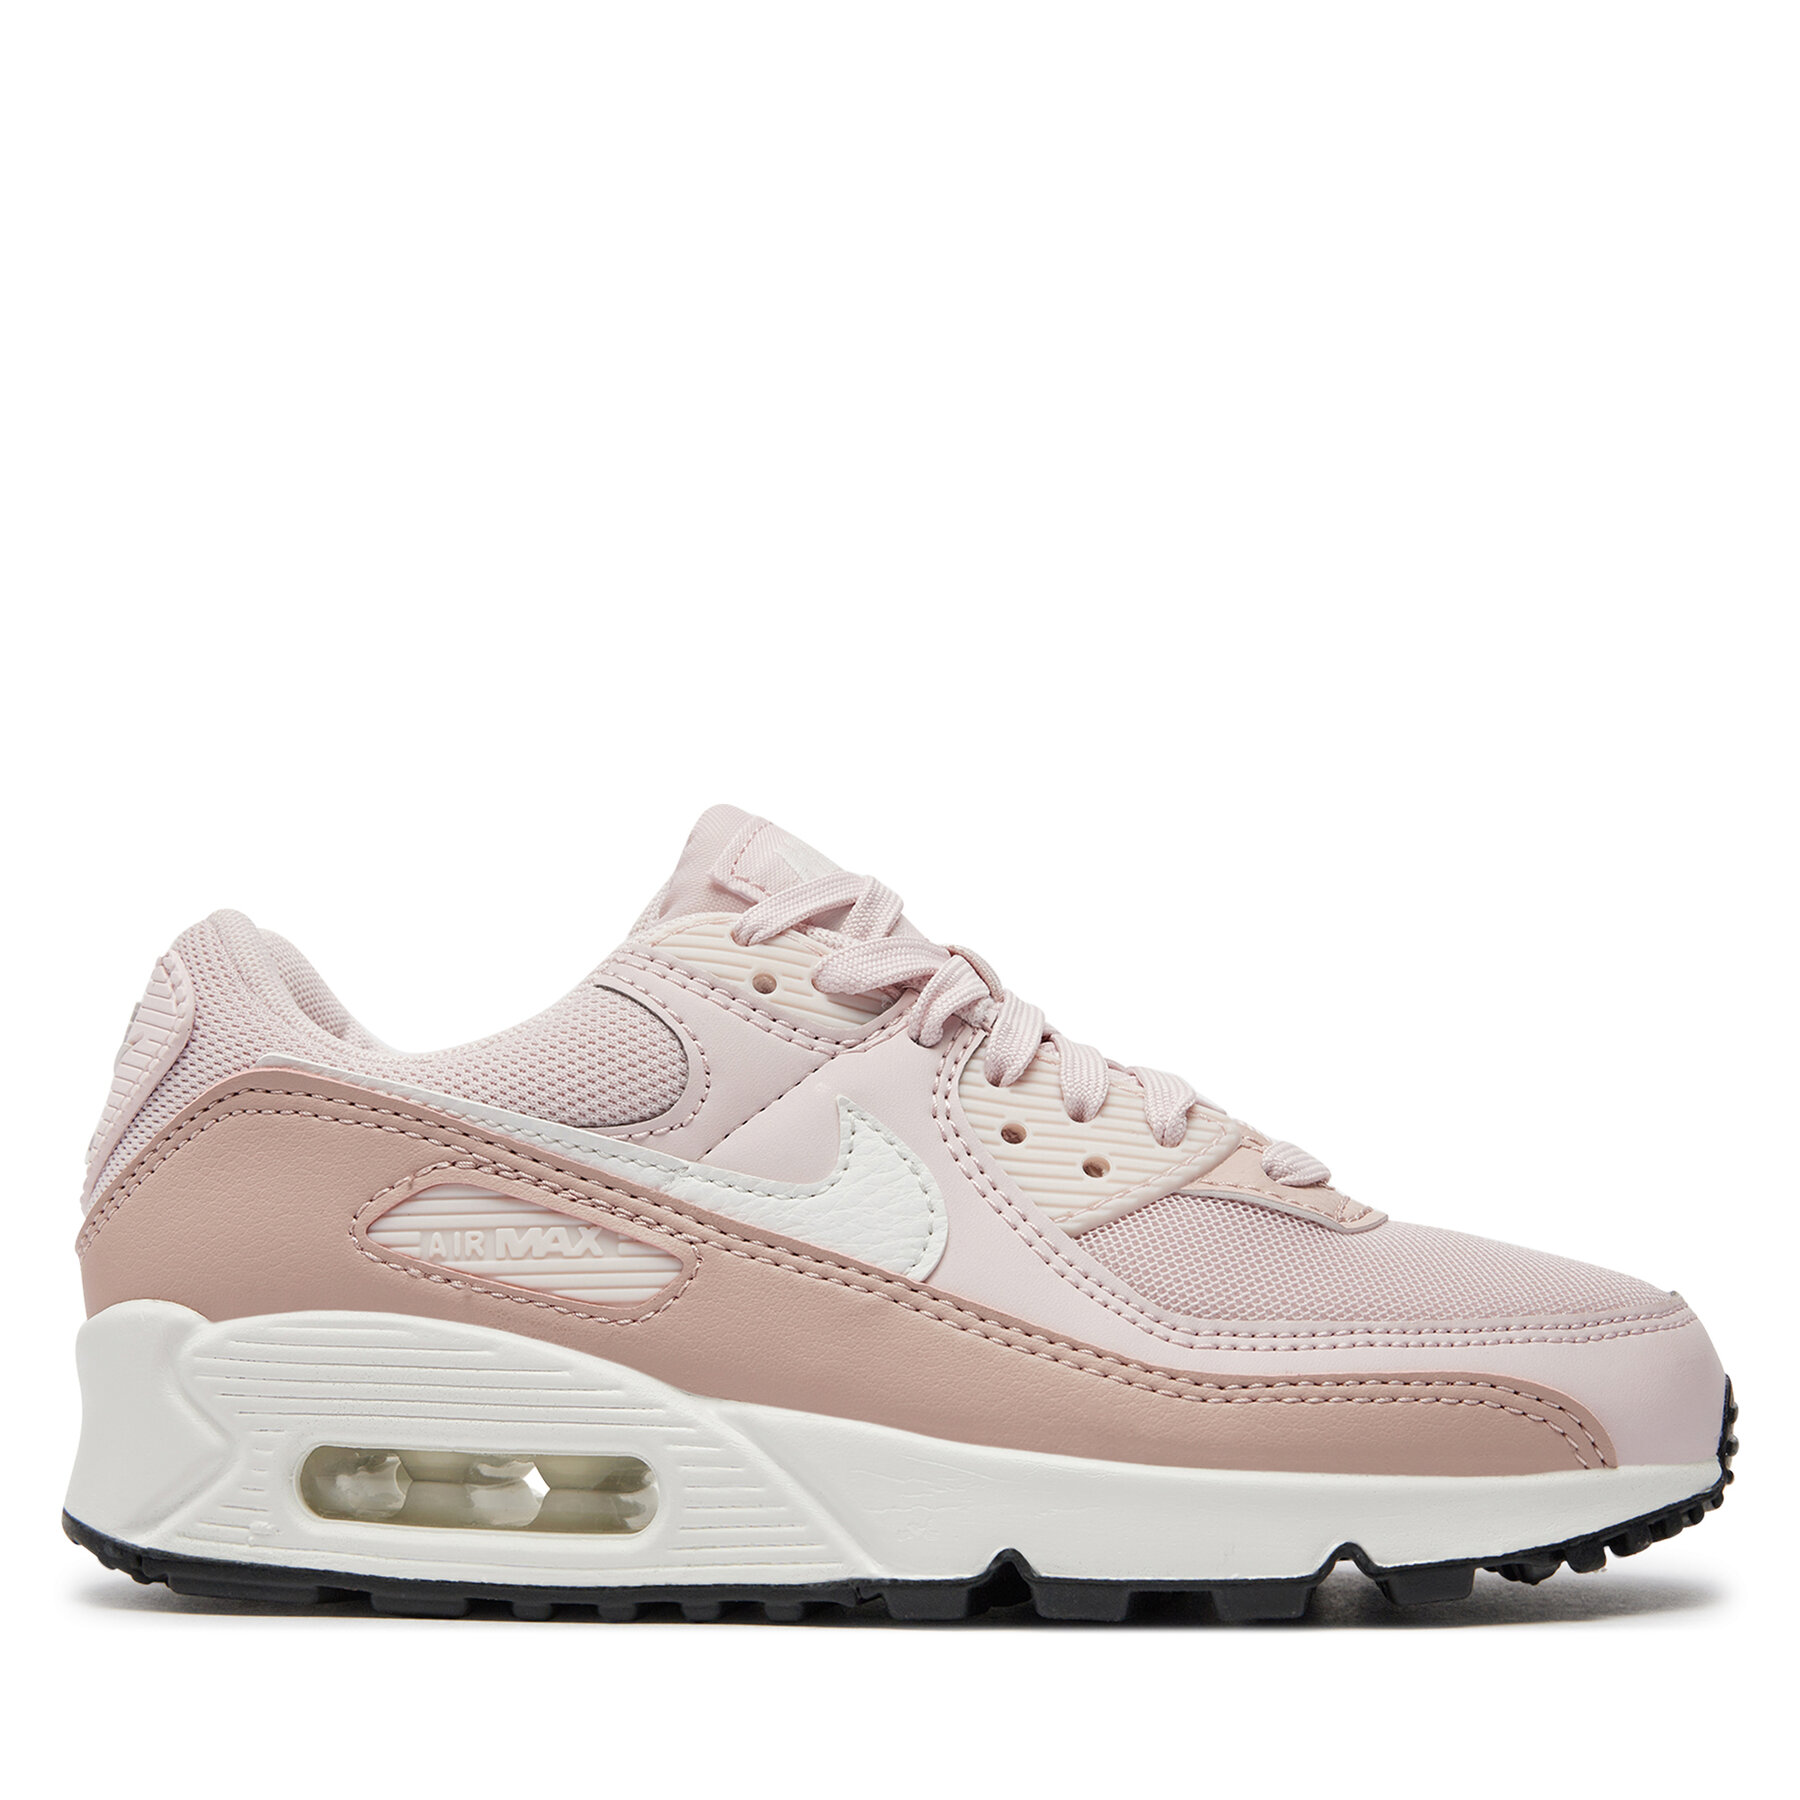 Nike Air Max 90 Mujer barely rose/pink oxford/black/summit white